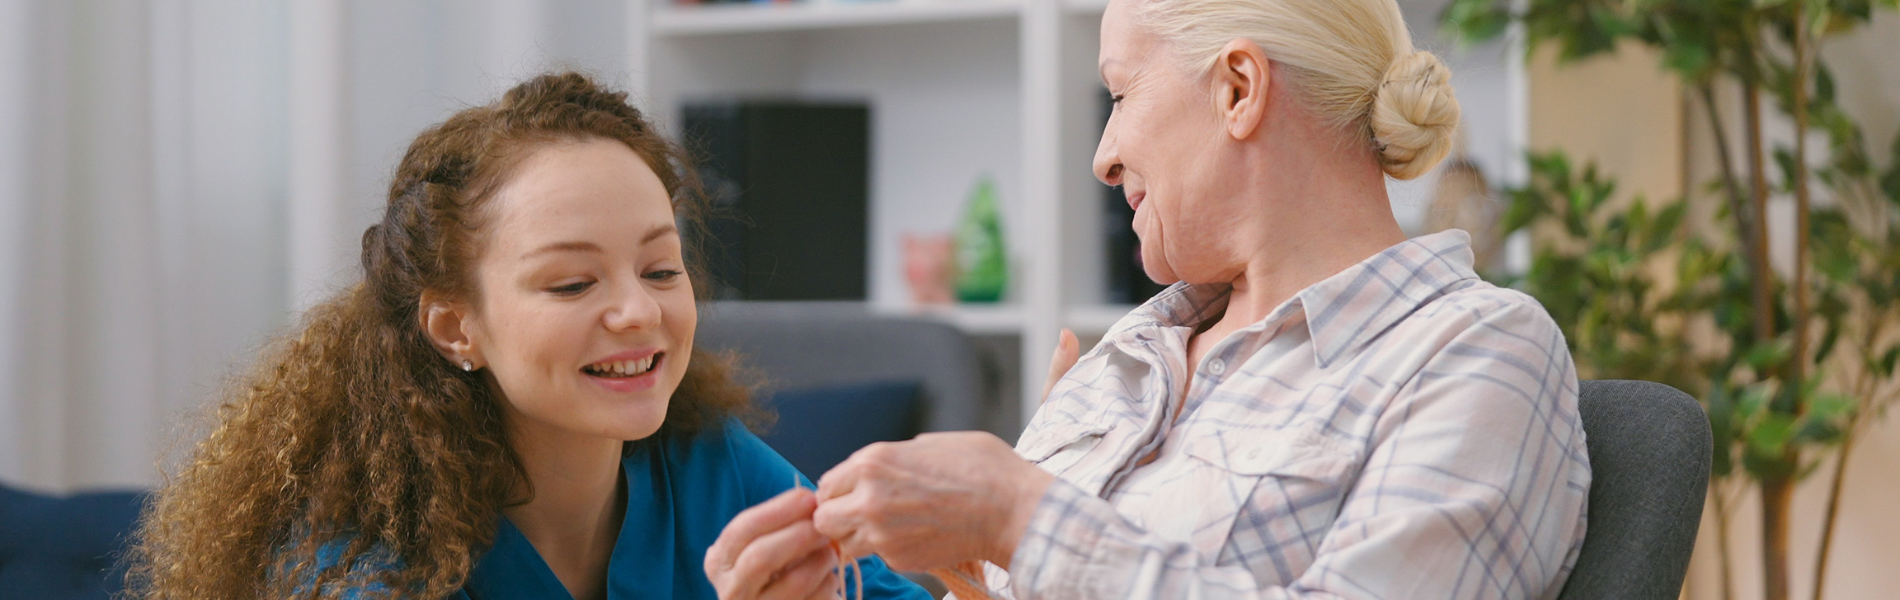 Young home care nurse and elderly woman smiling